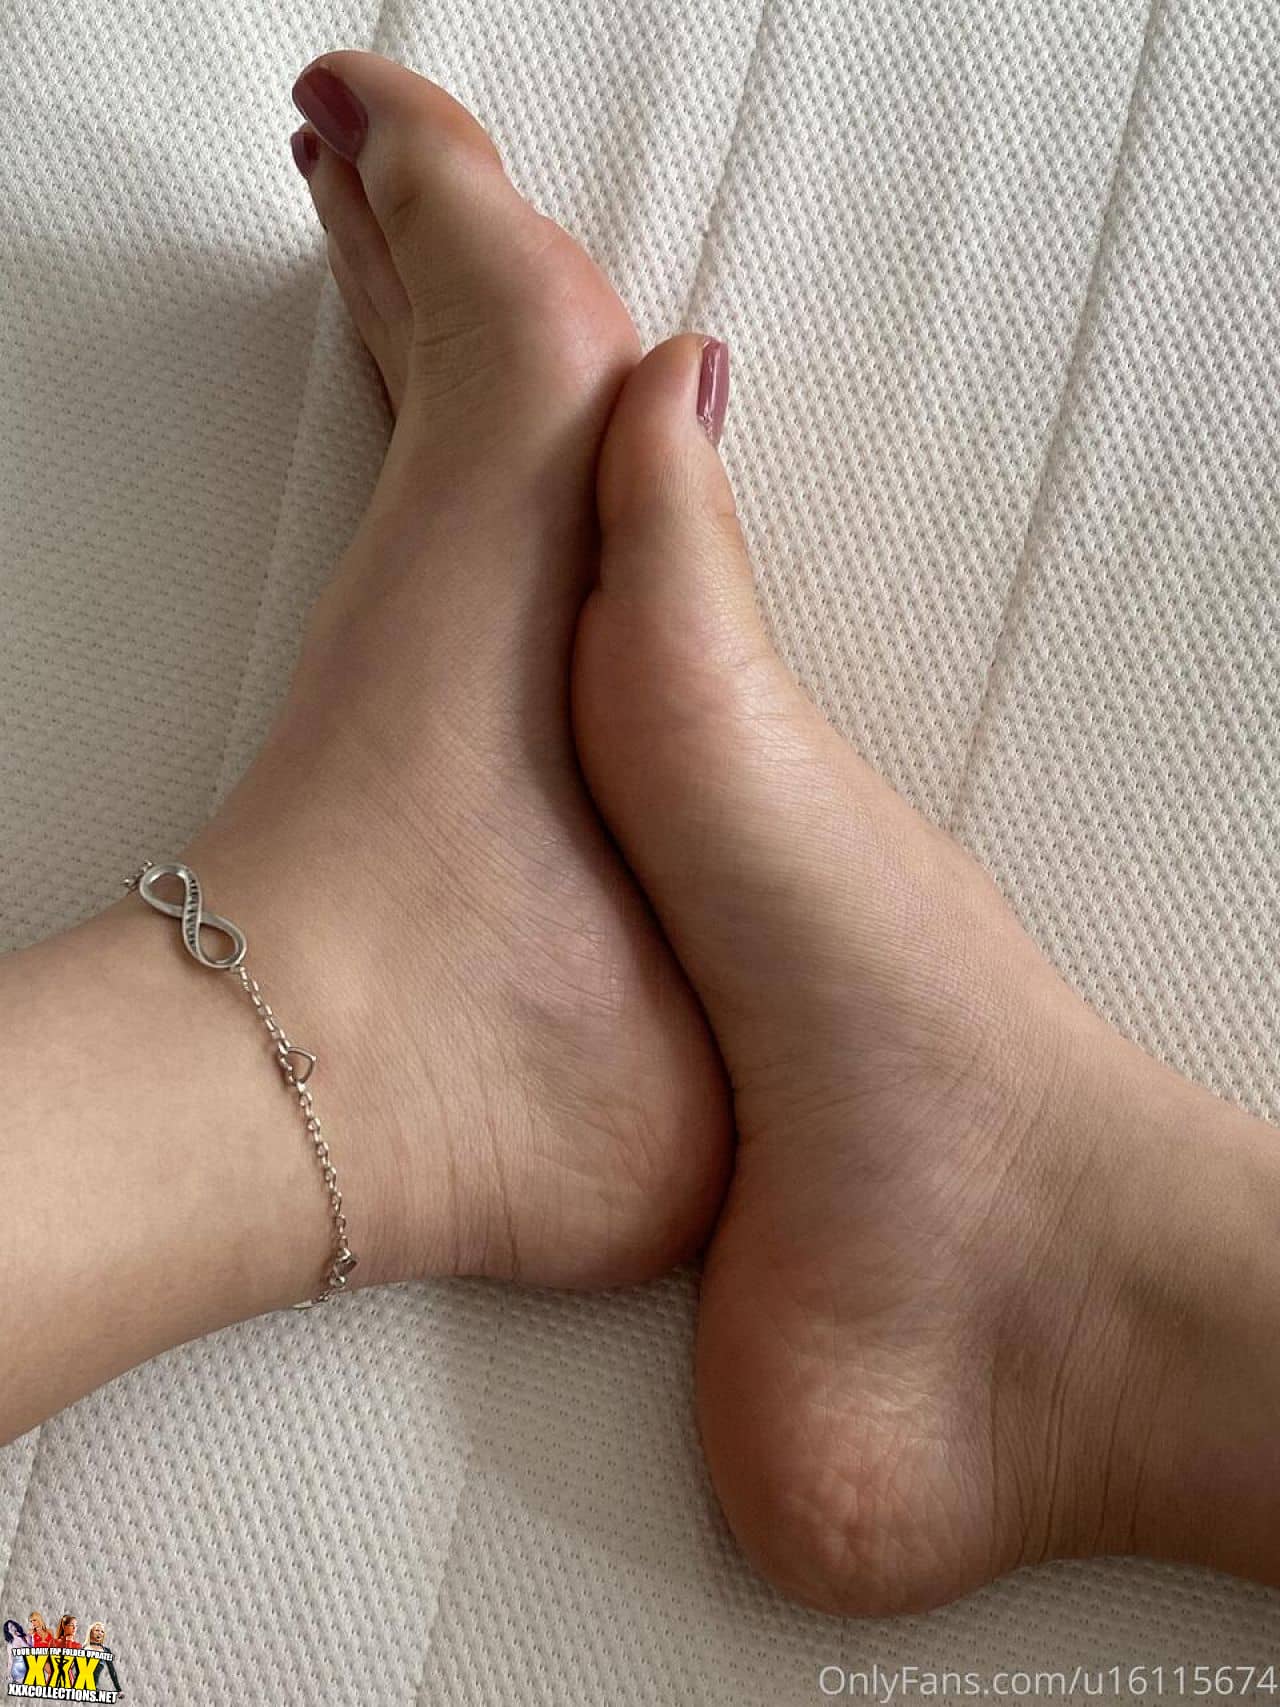 https://xxximg.art/ssdimg2/images/2021/06/29/LunaQueen_OnlyFans_2020_05_09_38309598_Ready_for_some_feet_whorship_content_Swipe.jpg